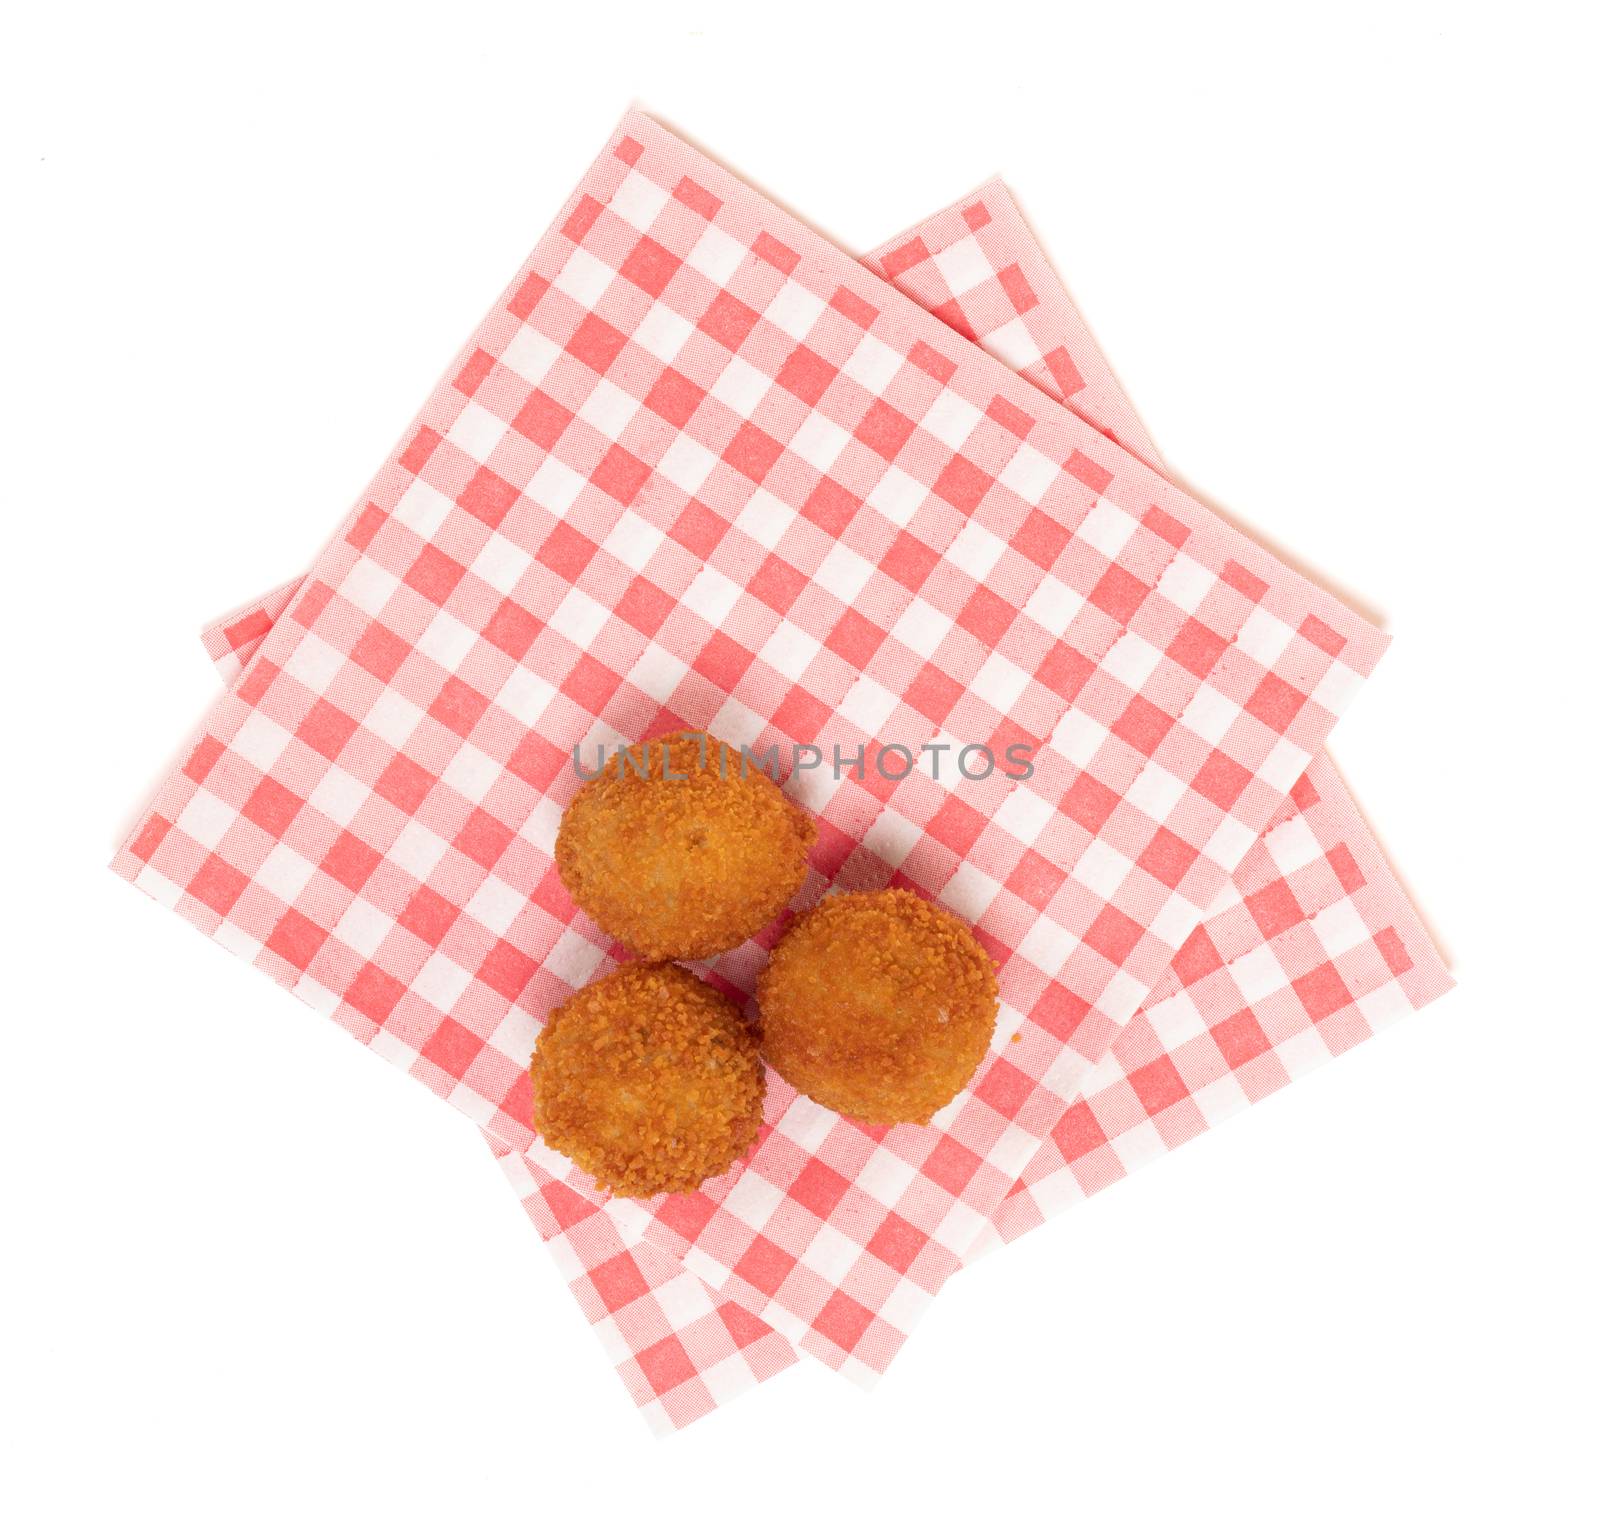 Dutch traditional snack bitterbal on a red and white napkin, isolated